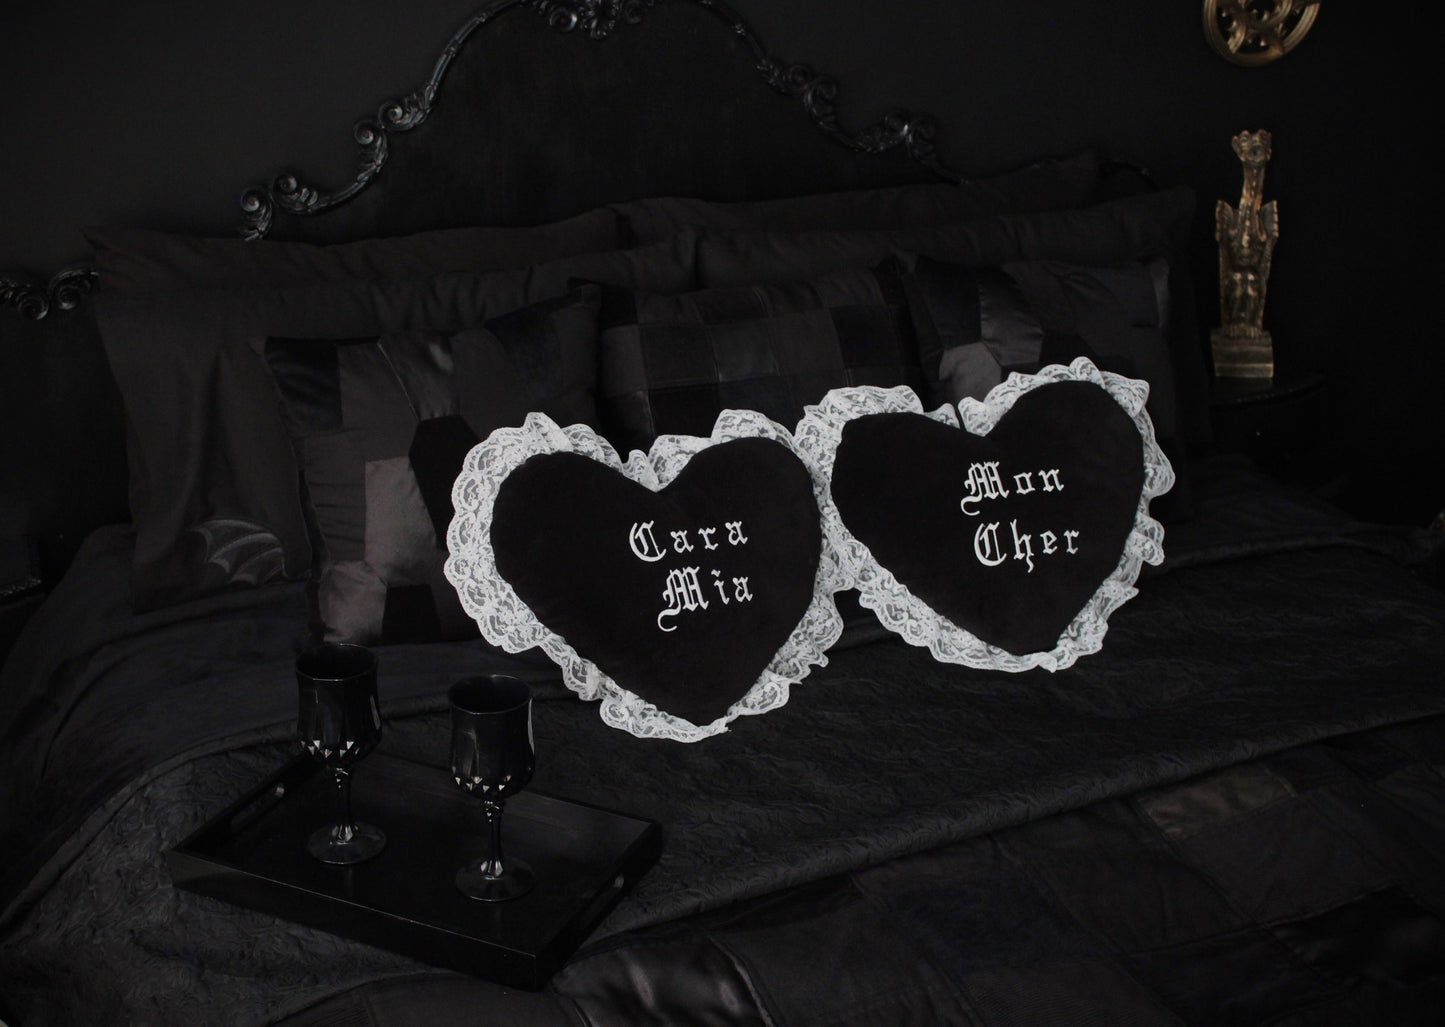 A black bedroom; black walls, black headboard, black patchwork cushions and layers of black throws on the bed. Two cushions sit centre, both black hearts surrounded by white lace, one saying Mon Cher and the other Cara Mia. A gargoyle proudly sits in the background.